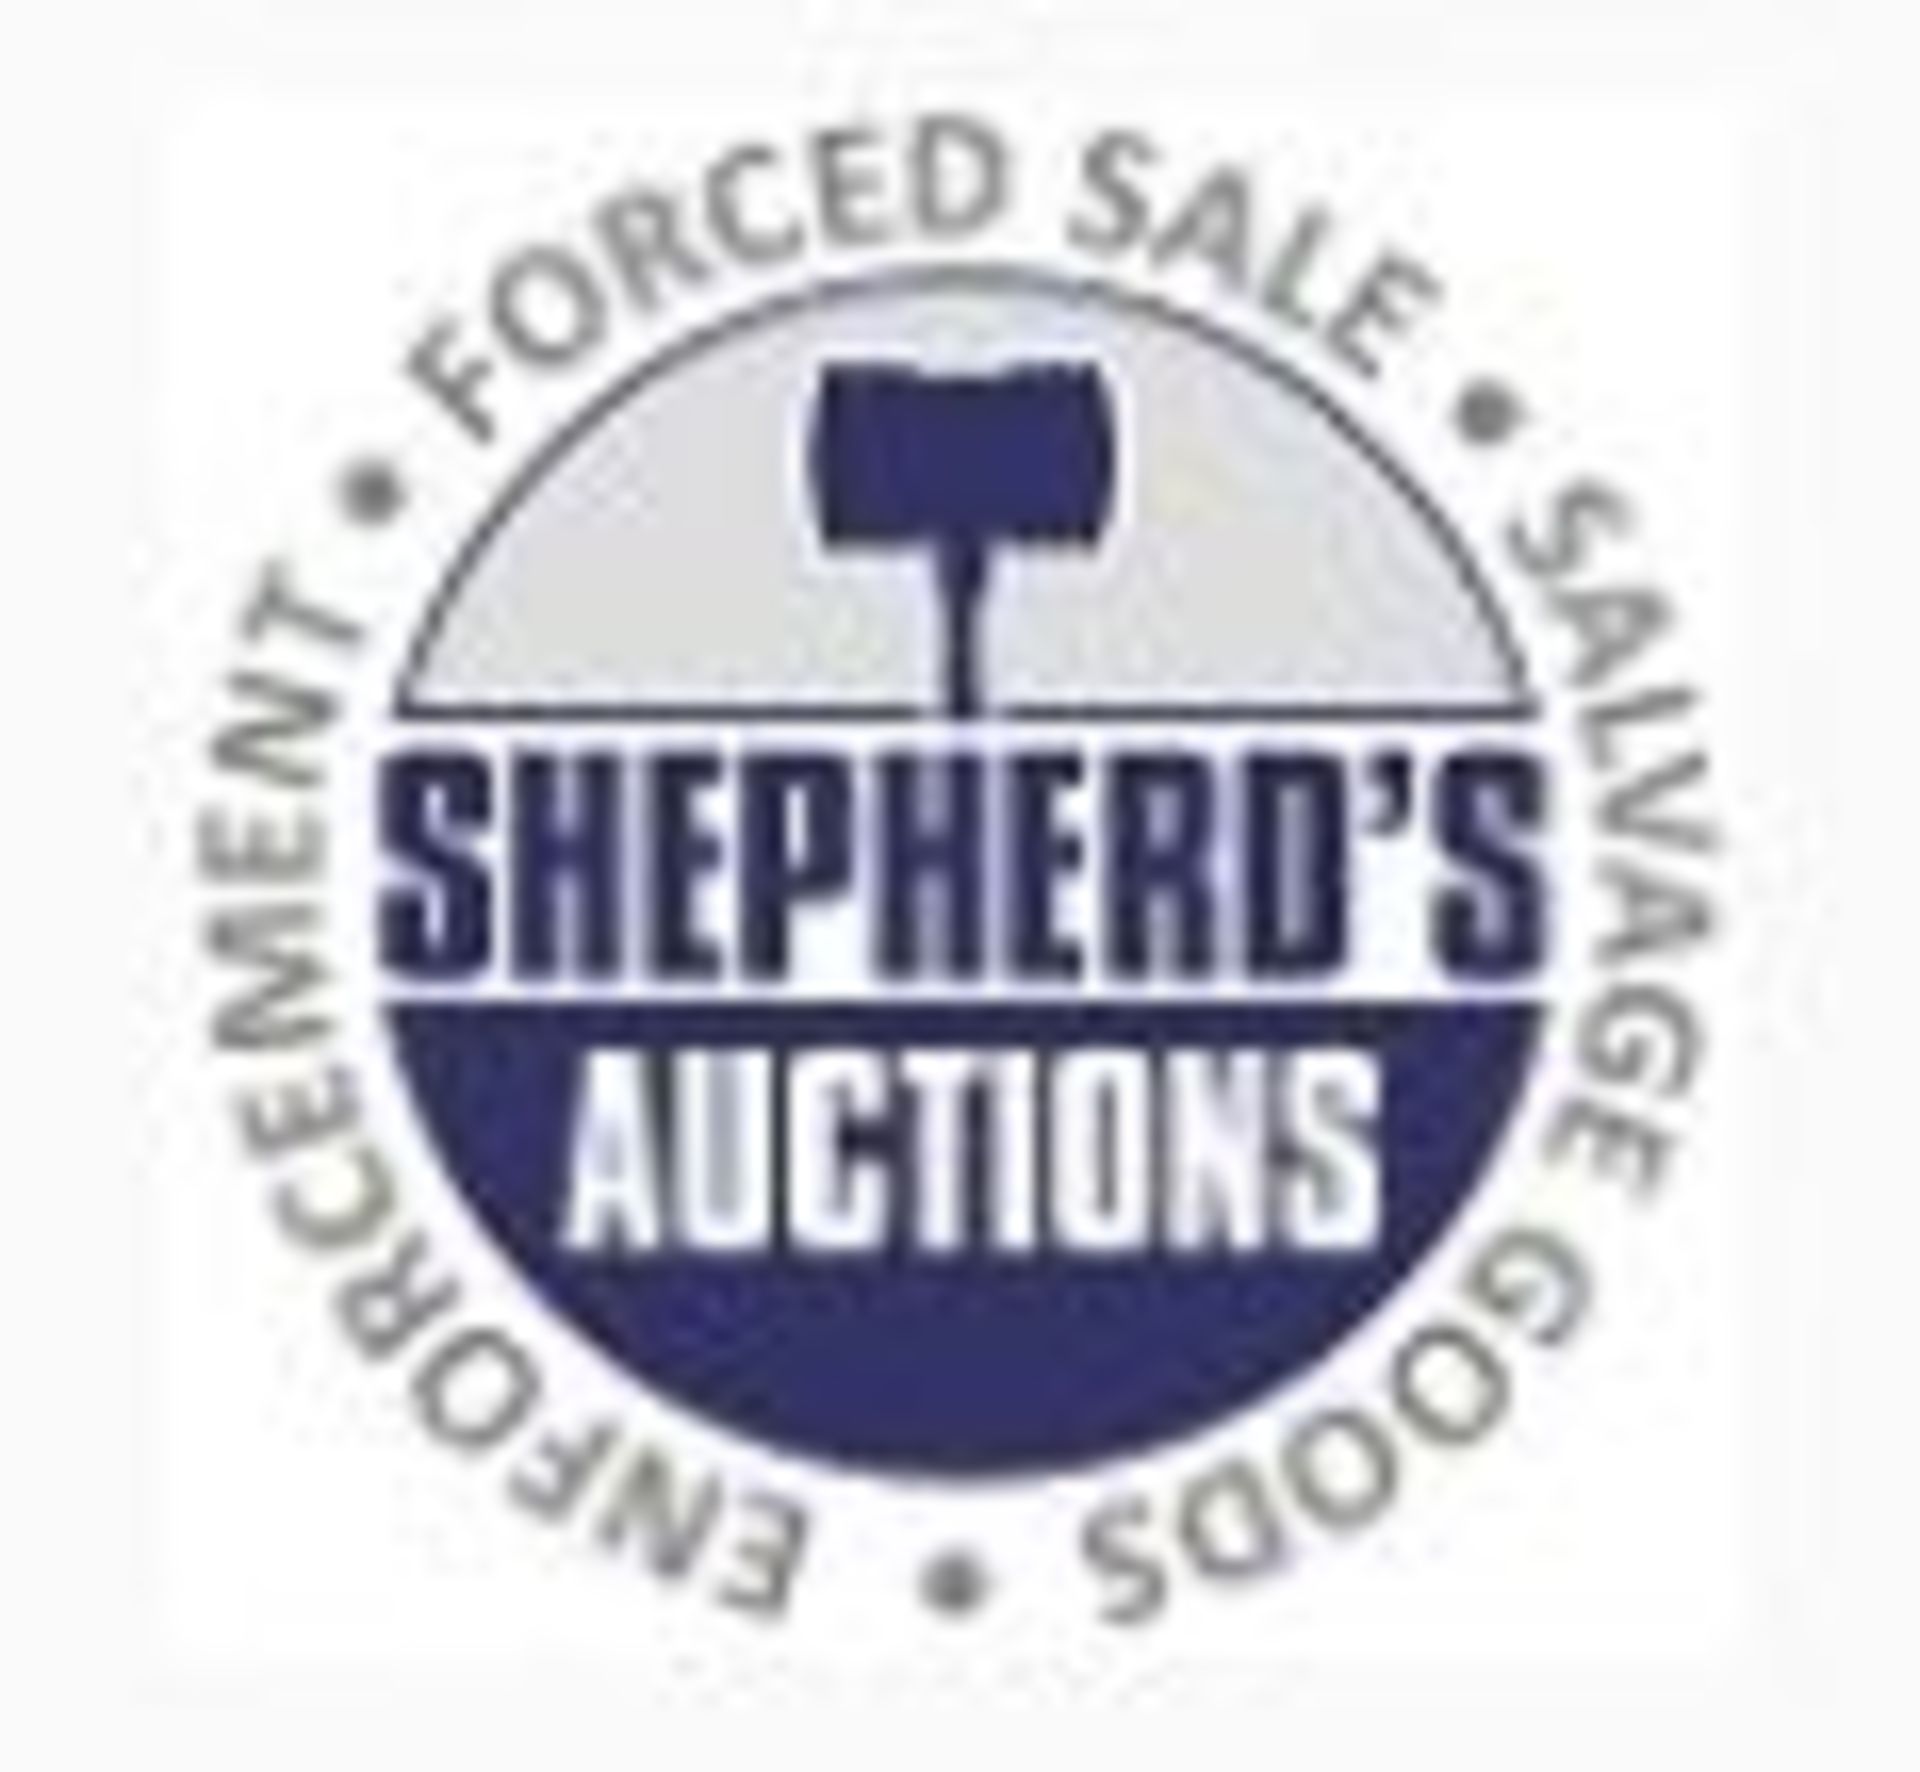 PLEASE READ BEFORE BIDDING!!, All the lots in this Auction are direct from the Distributor, we